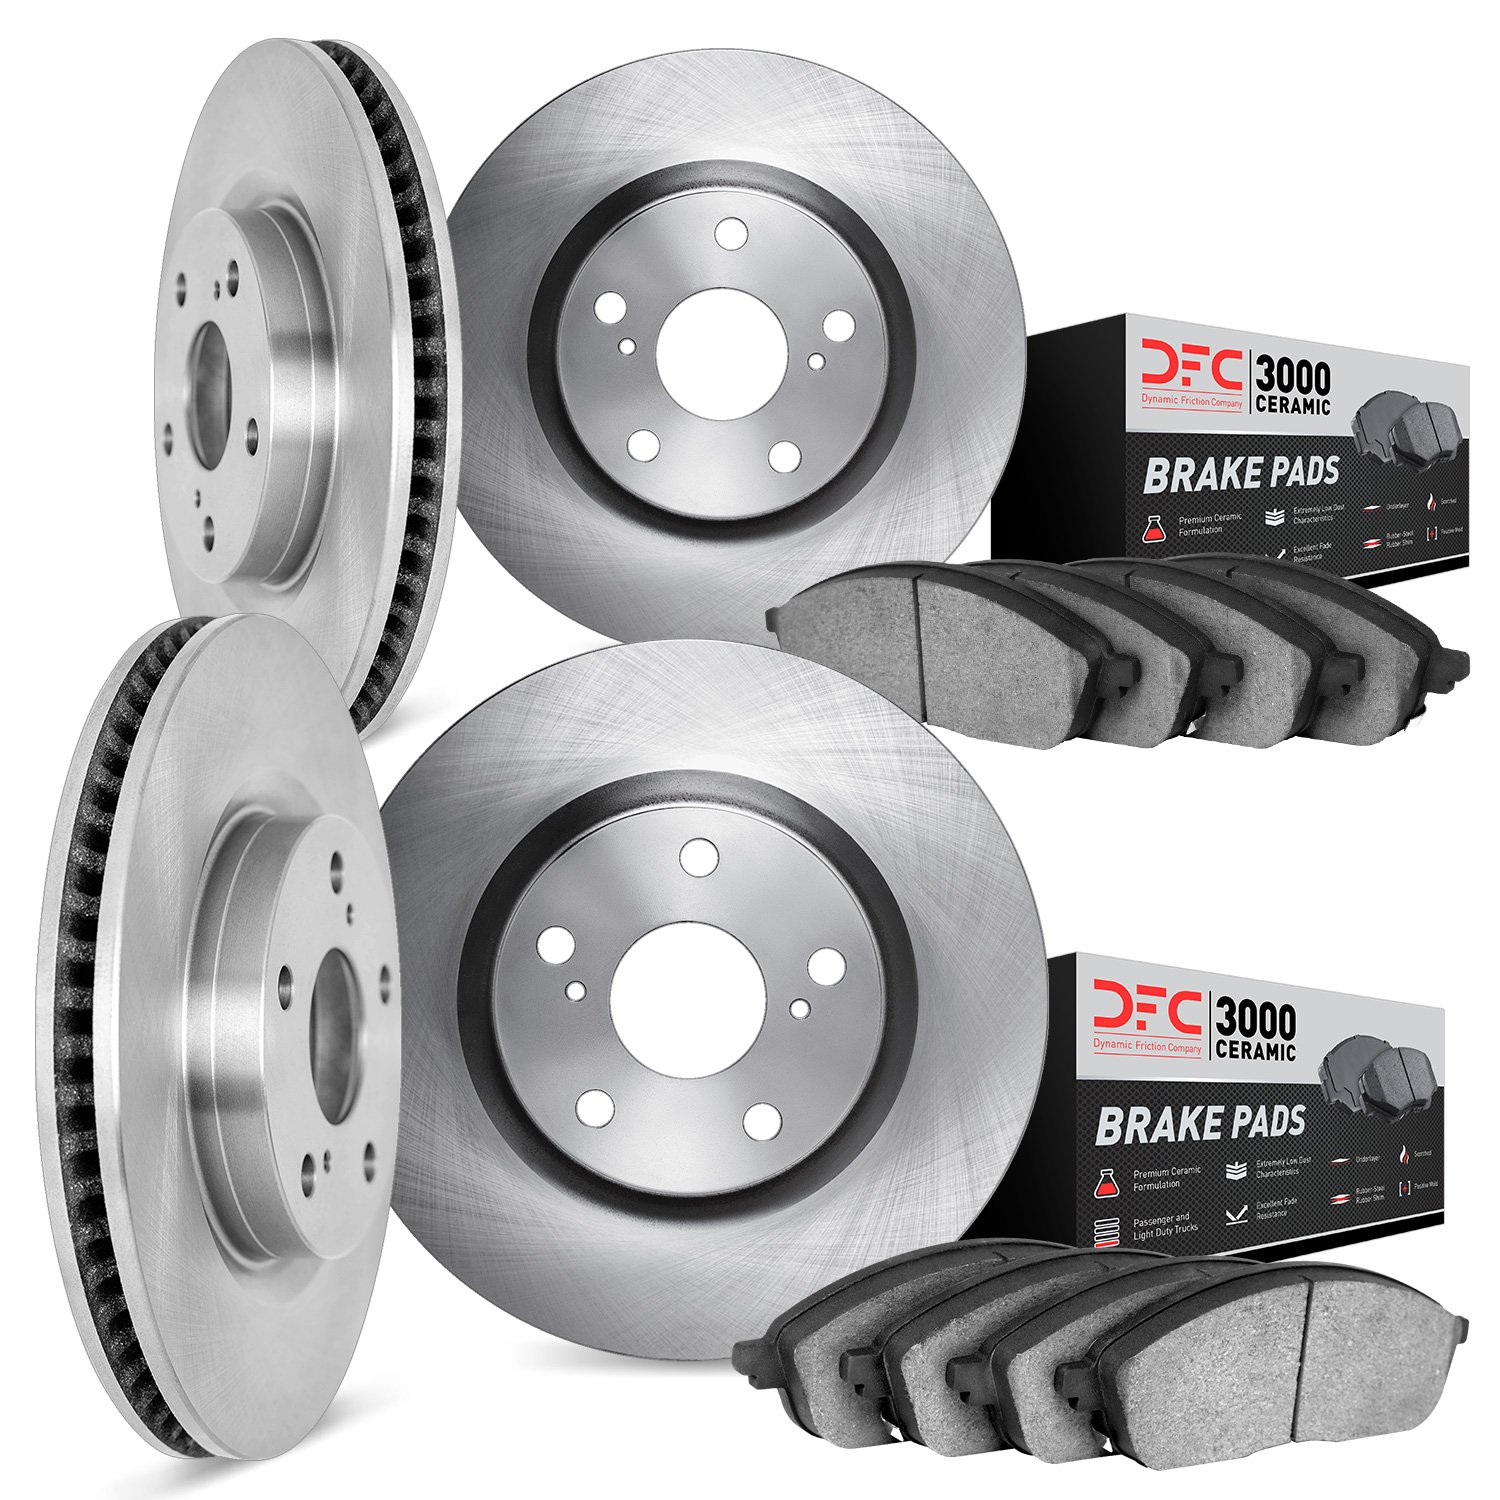 6304-76091 Brake Rotors with 3000-Series Ceramic Brake Pads Kit, Fits Select Lexus/Toyota/Scion, Position: Front and Rear